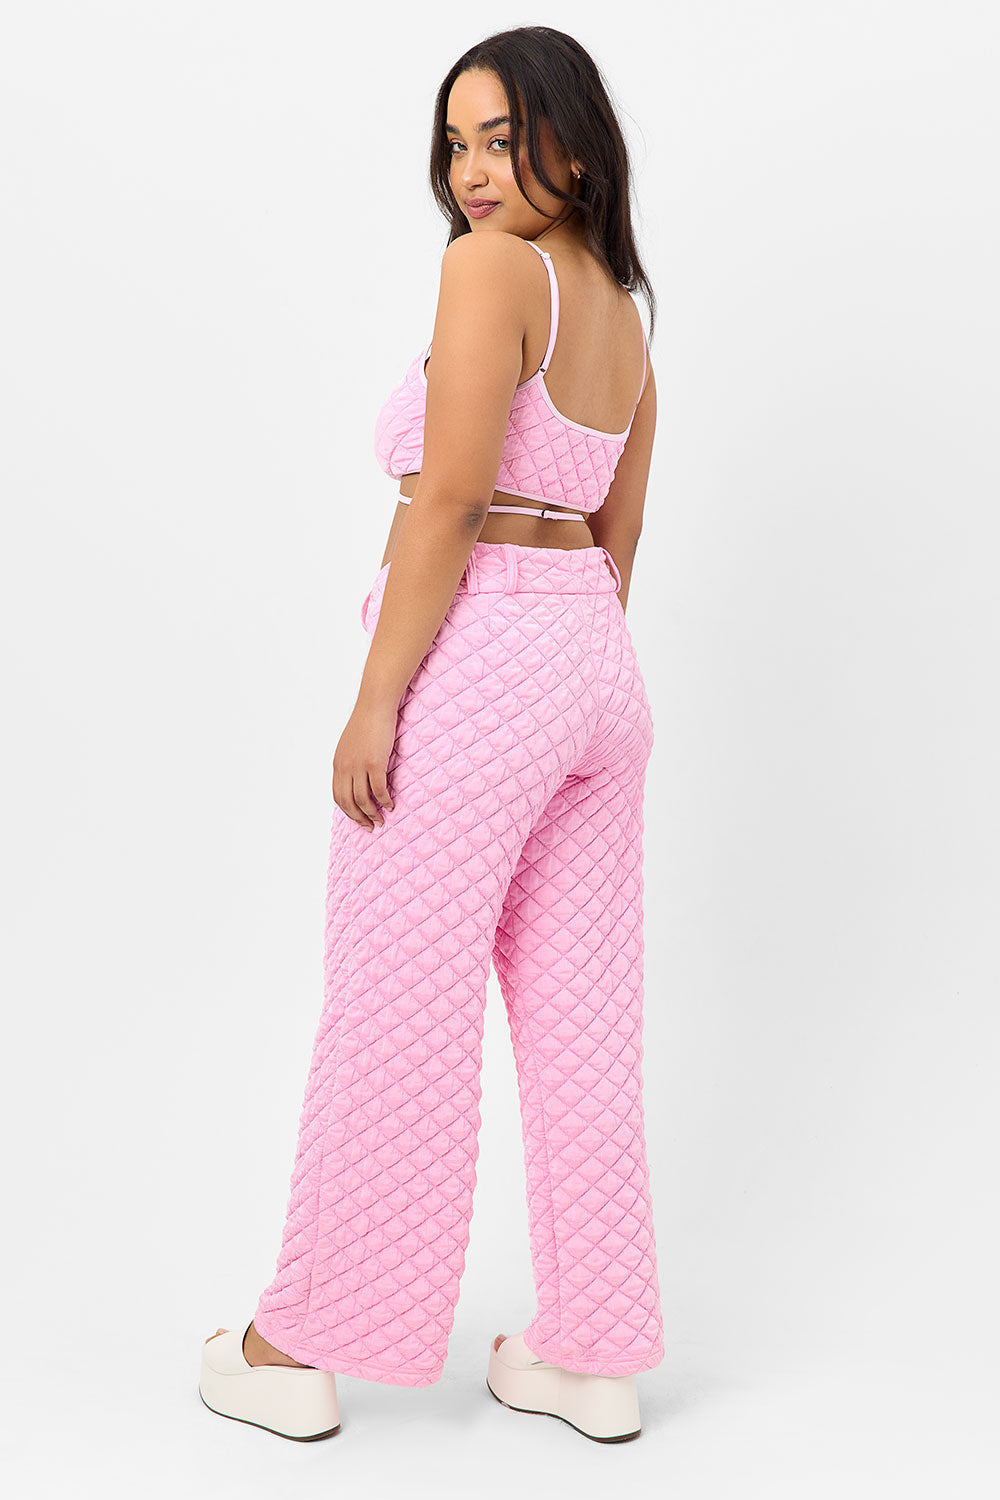 Chilli Cargo Pant - Baby Pink